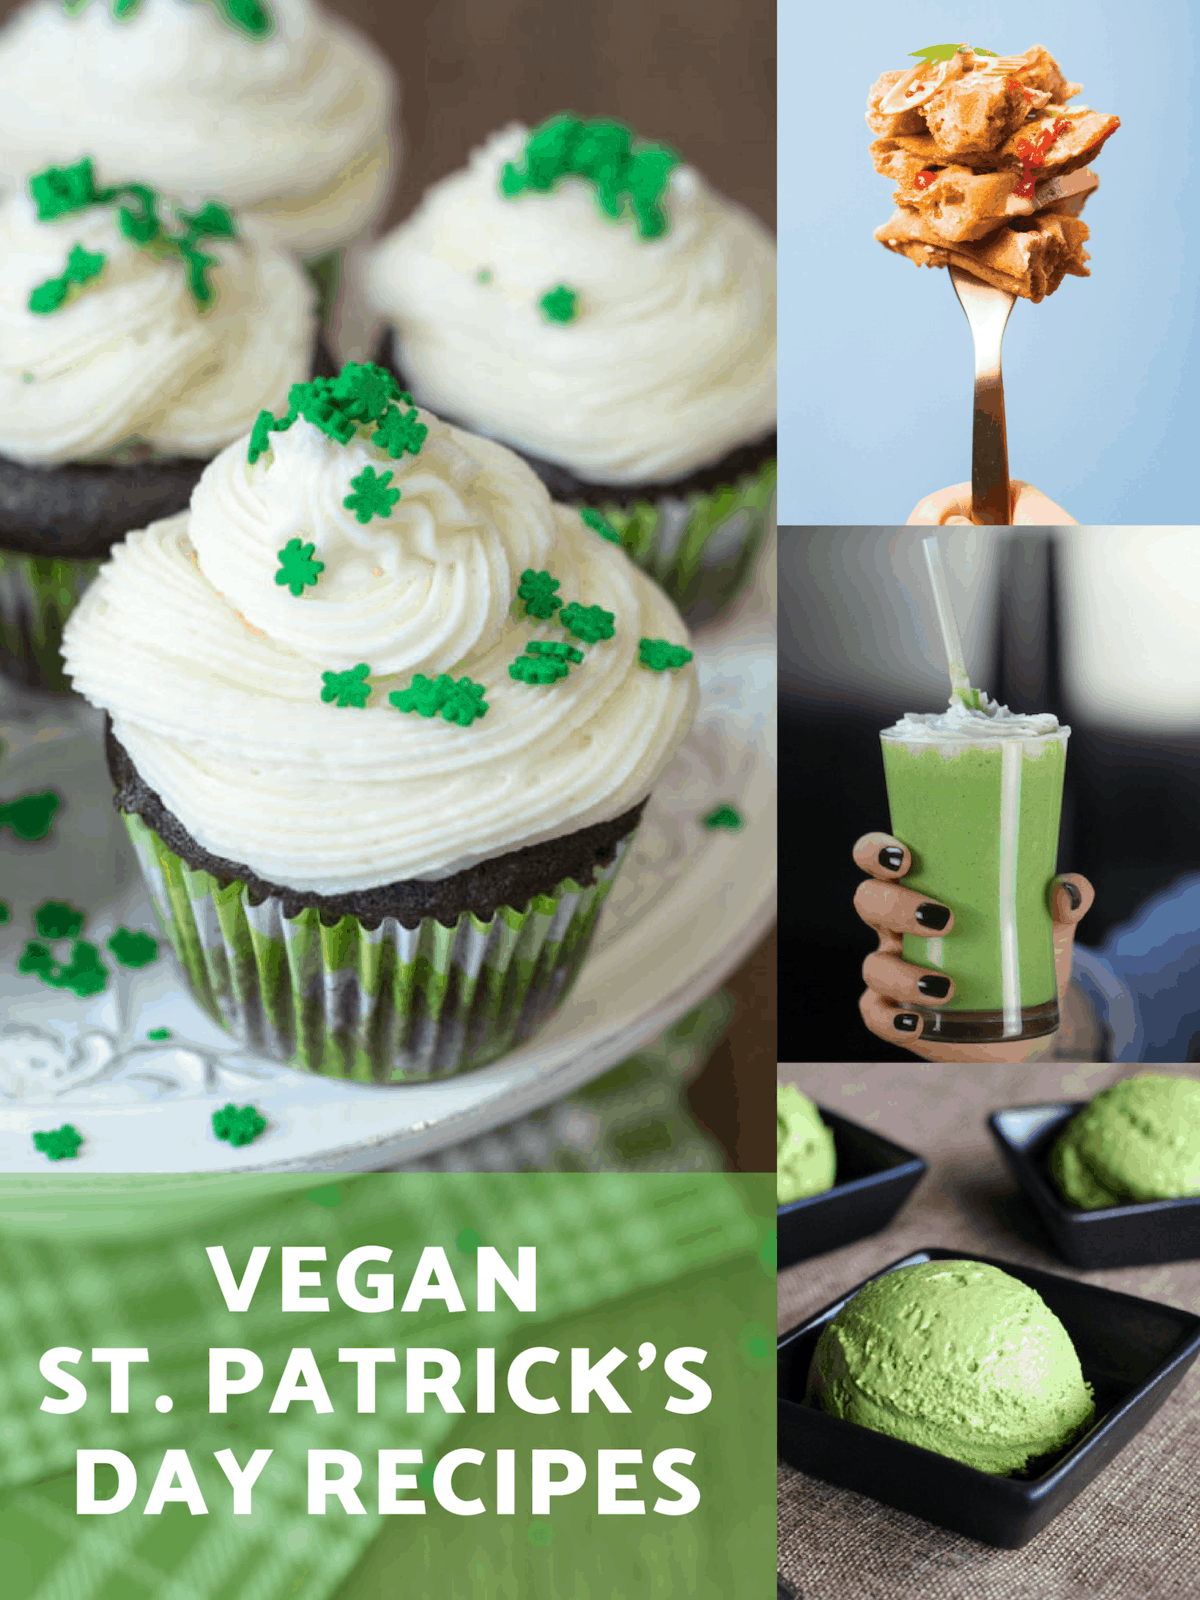 5 Vegan St Patrick’s Day Recipes —  Cupcakes, Beer Waffles, Desserts & Drinks!